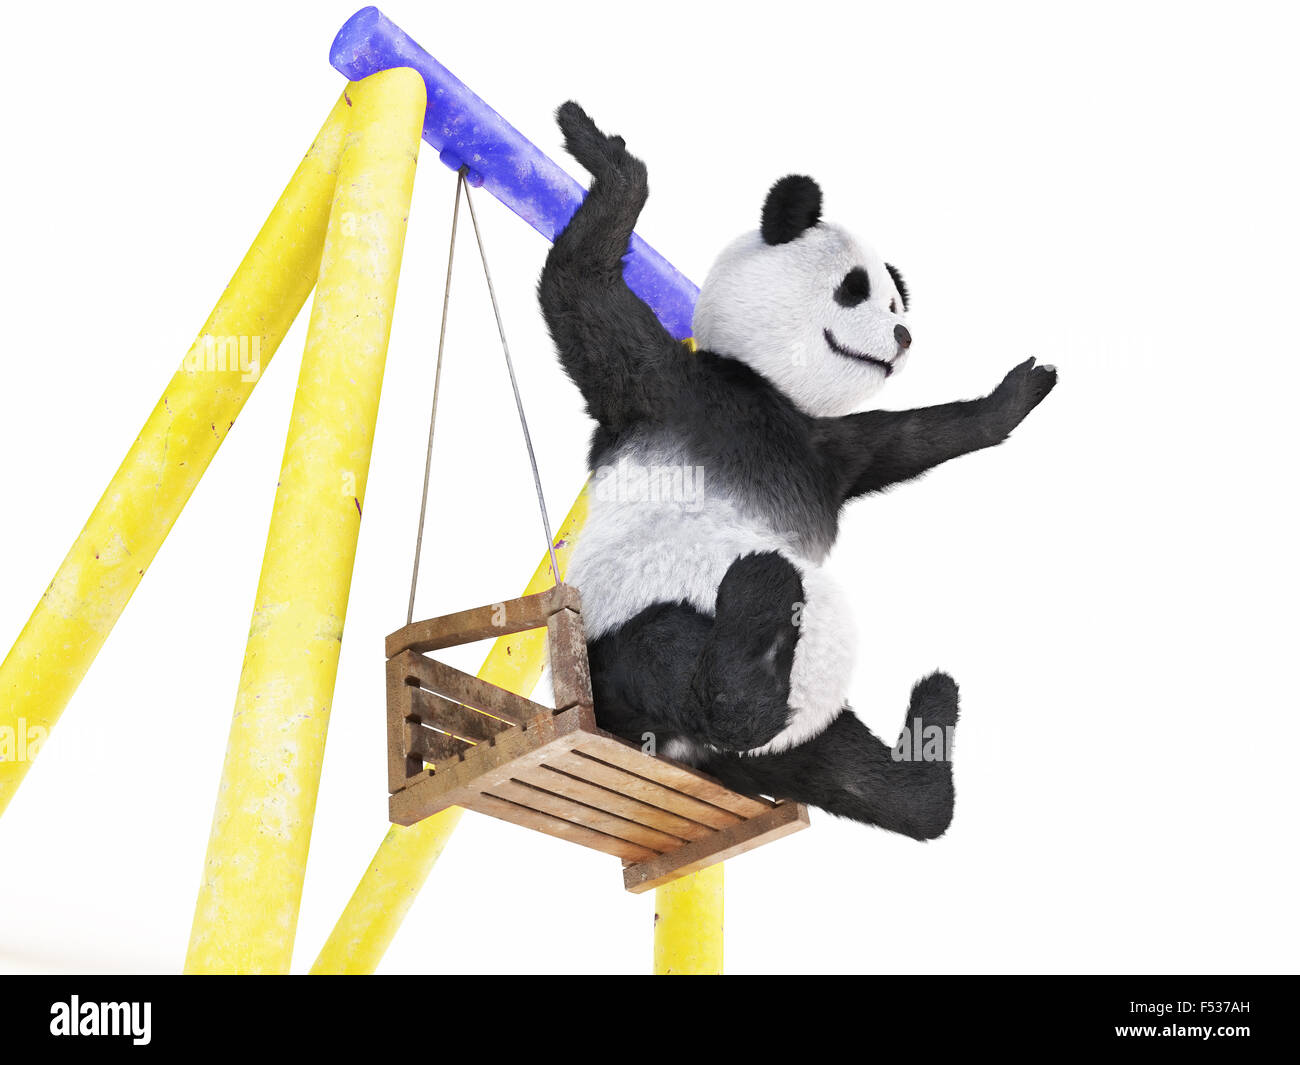 paws spread wide to sides cheerful character panda sitting on swing (yellow-blue seesaw). wobble and get ready to jump off  wood Stock Photo